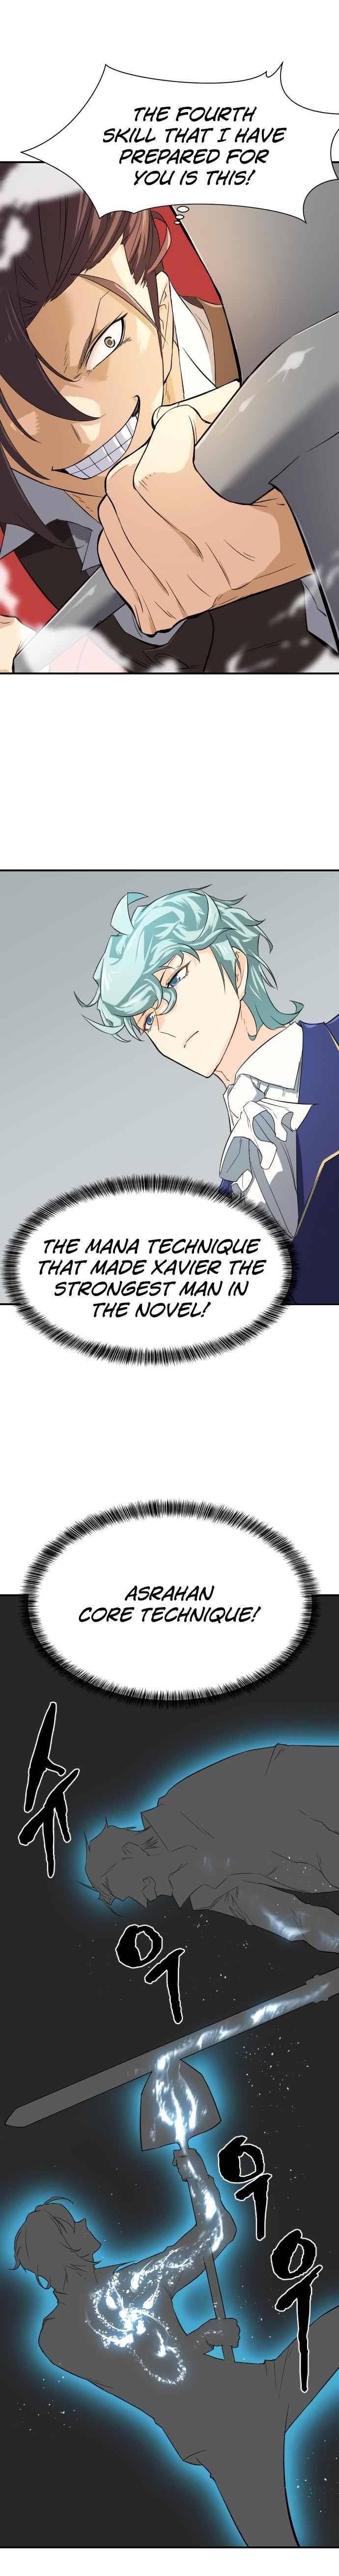 The Greatest Estate Developer Chapter 6 page 17